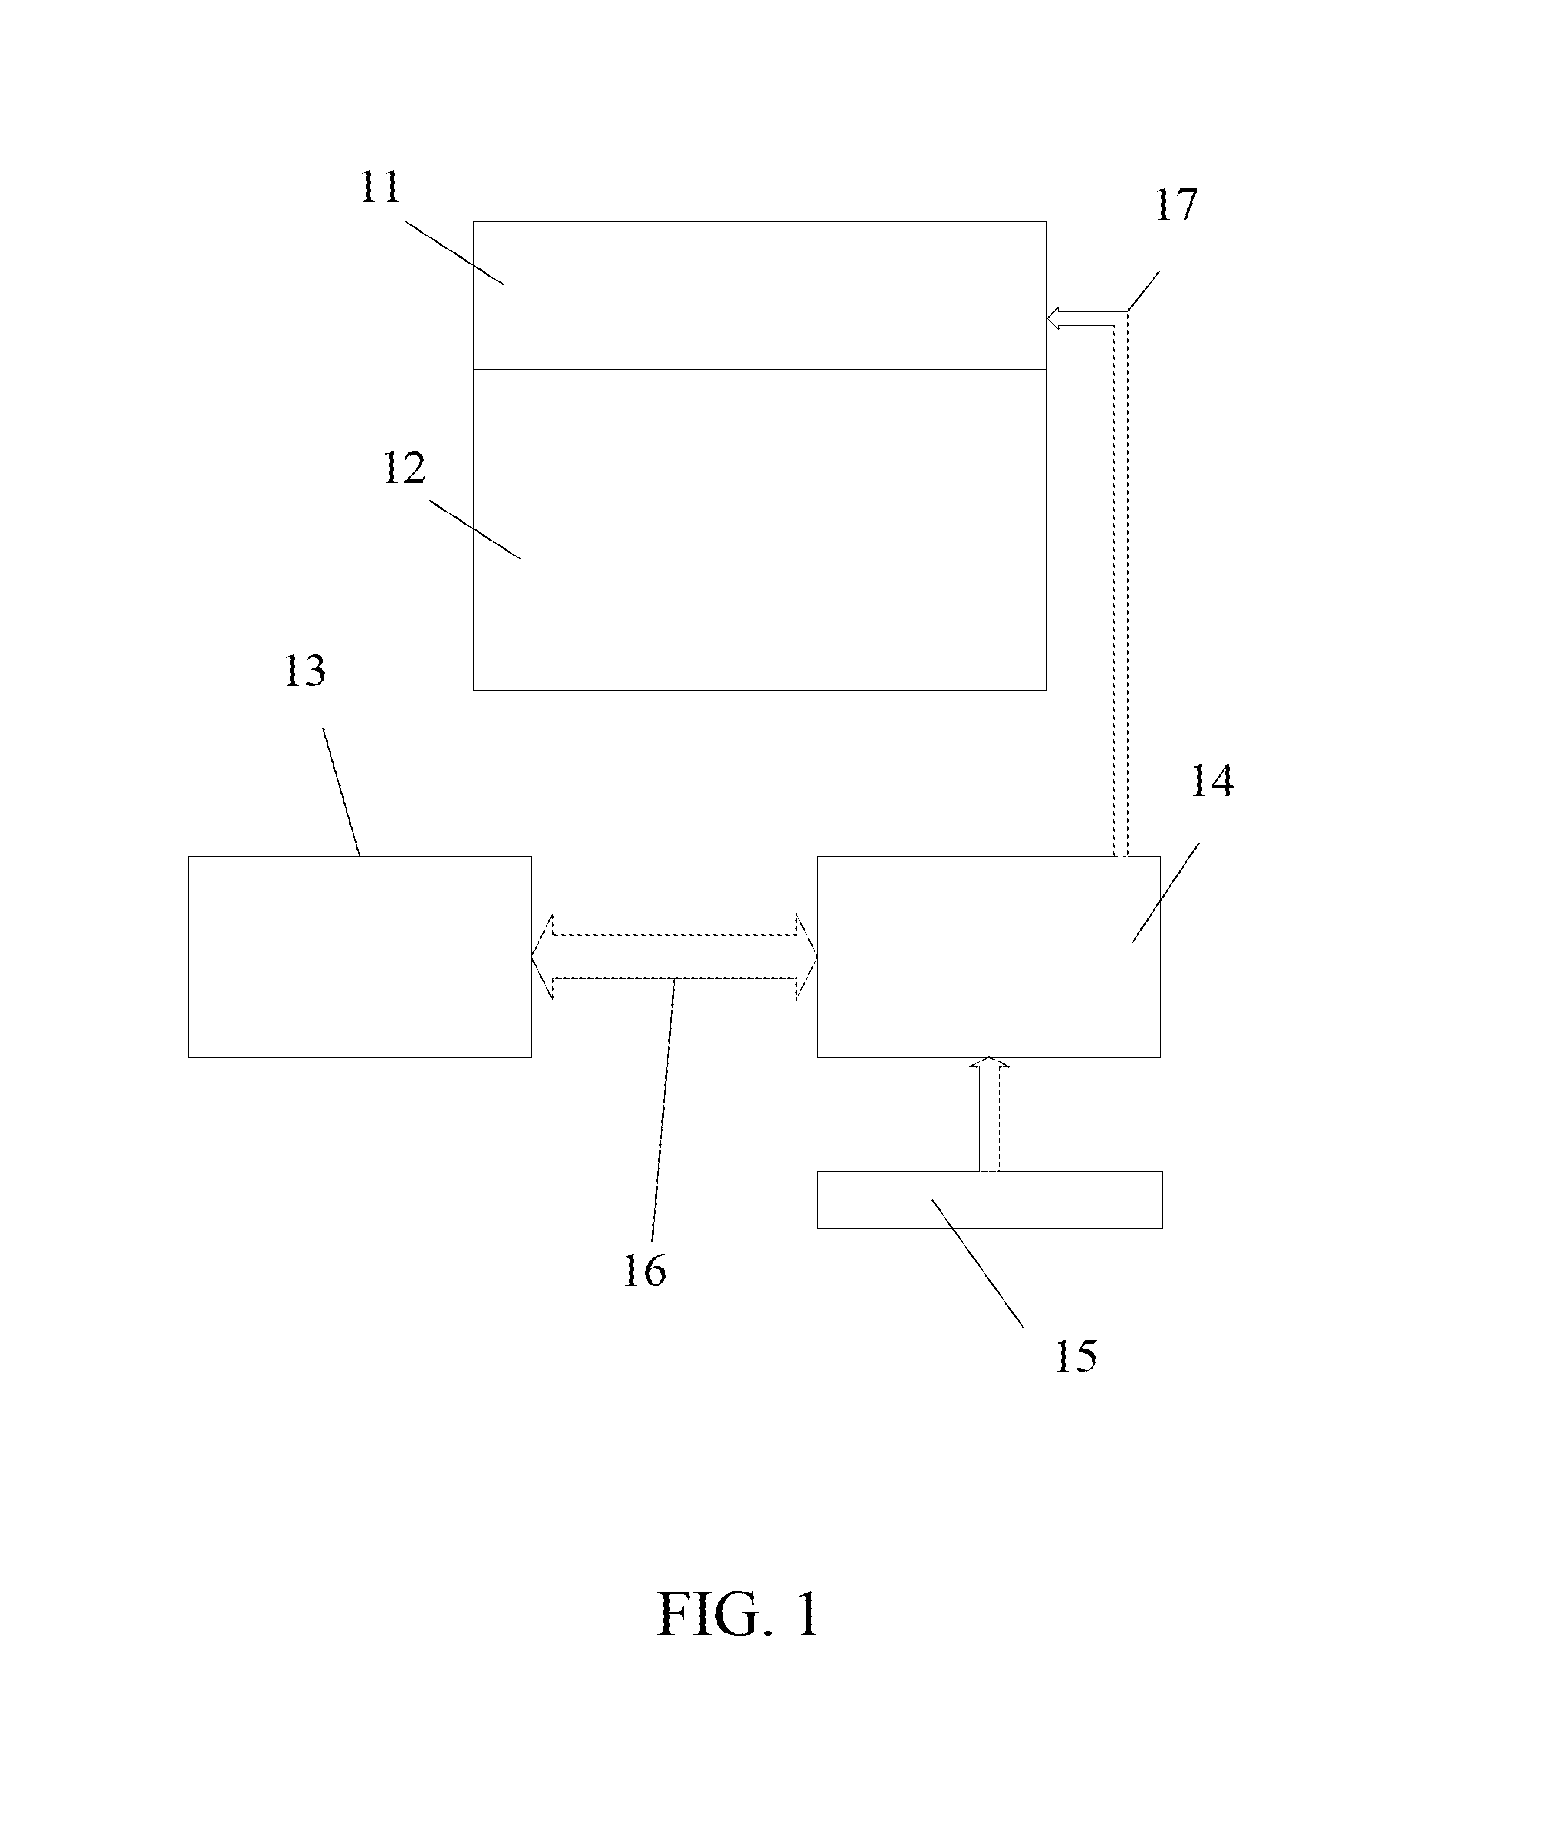 Electronically-controlled device for release of drugs, proteins, and other organic or inorganic chemicals